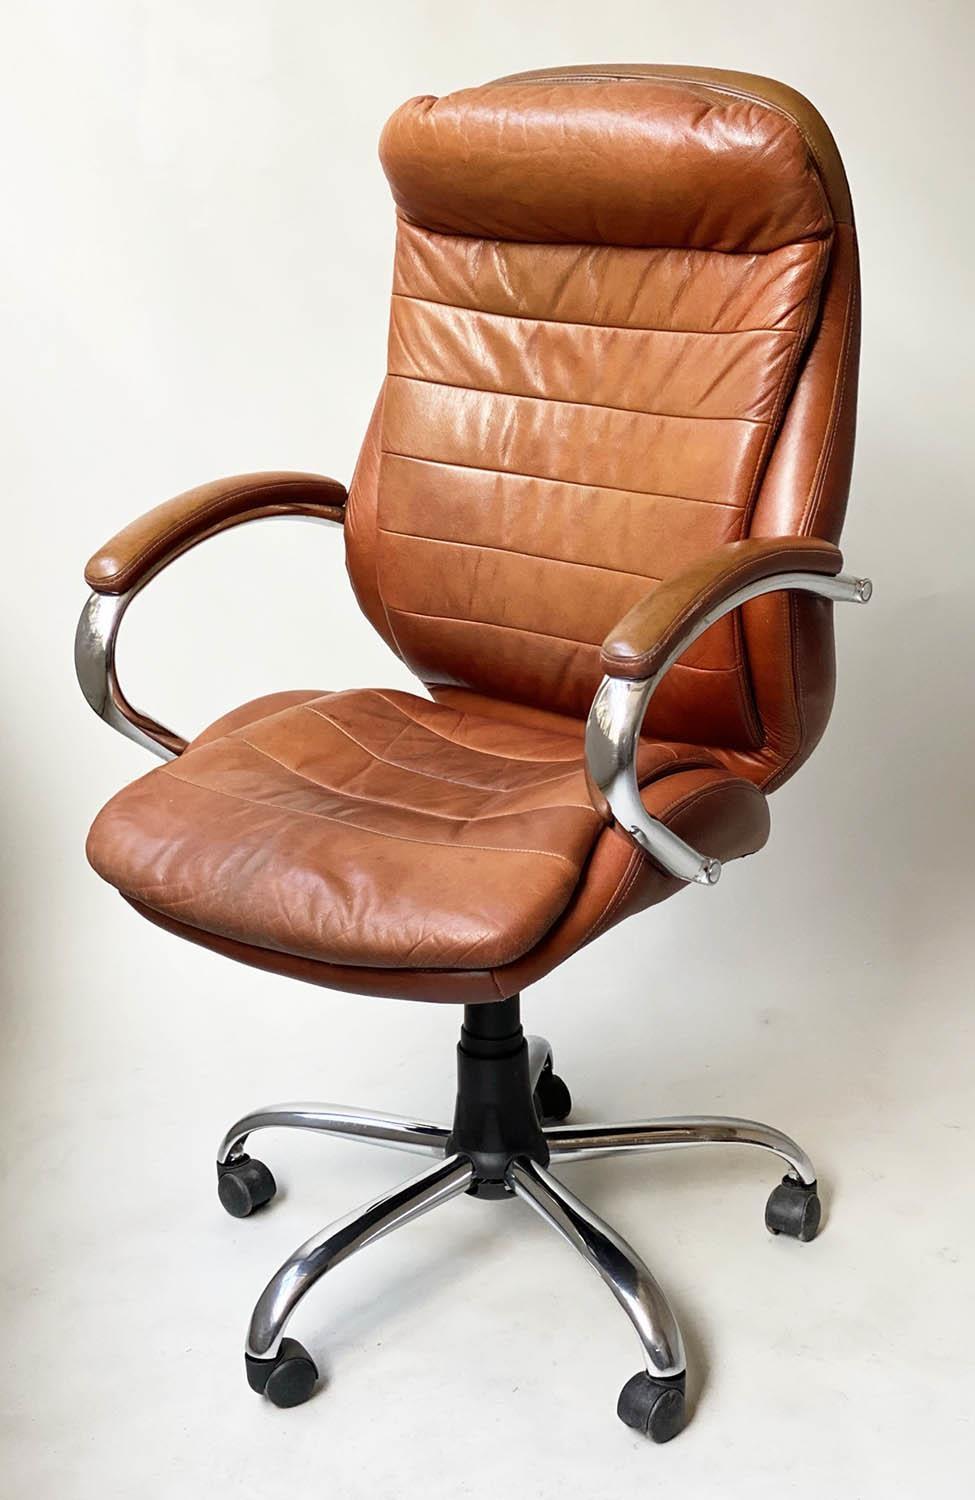 REVOLVING AND RECLINING DESK CHAIR, 1970's, stitched tan leather, on a djustable base, with castors,